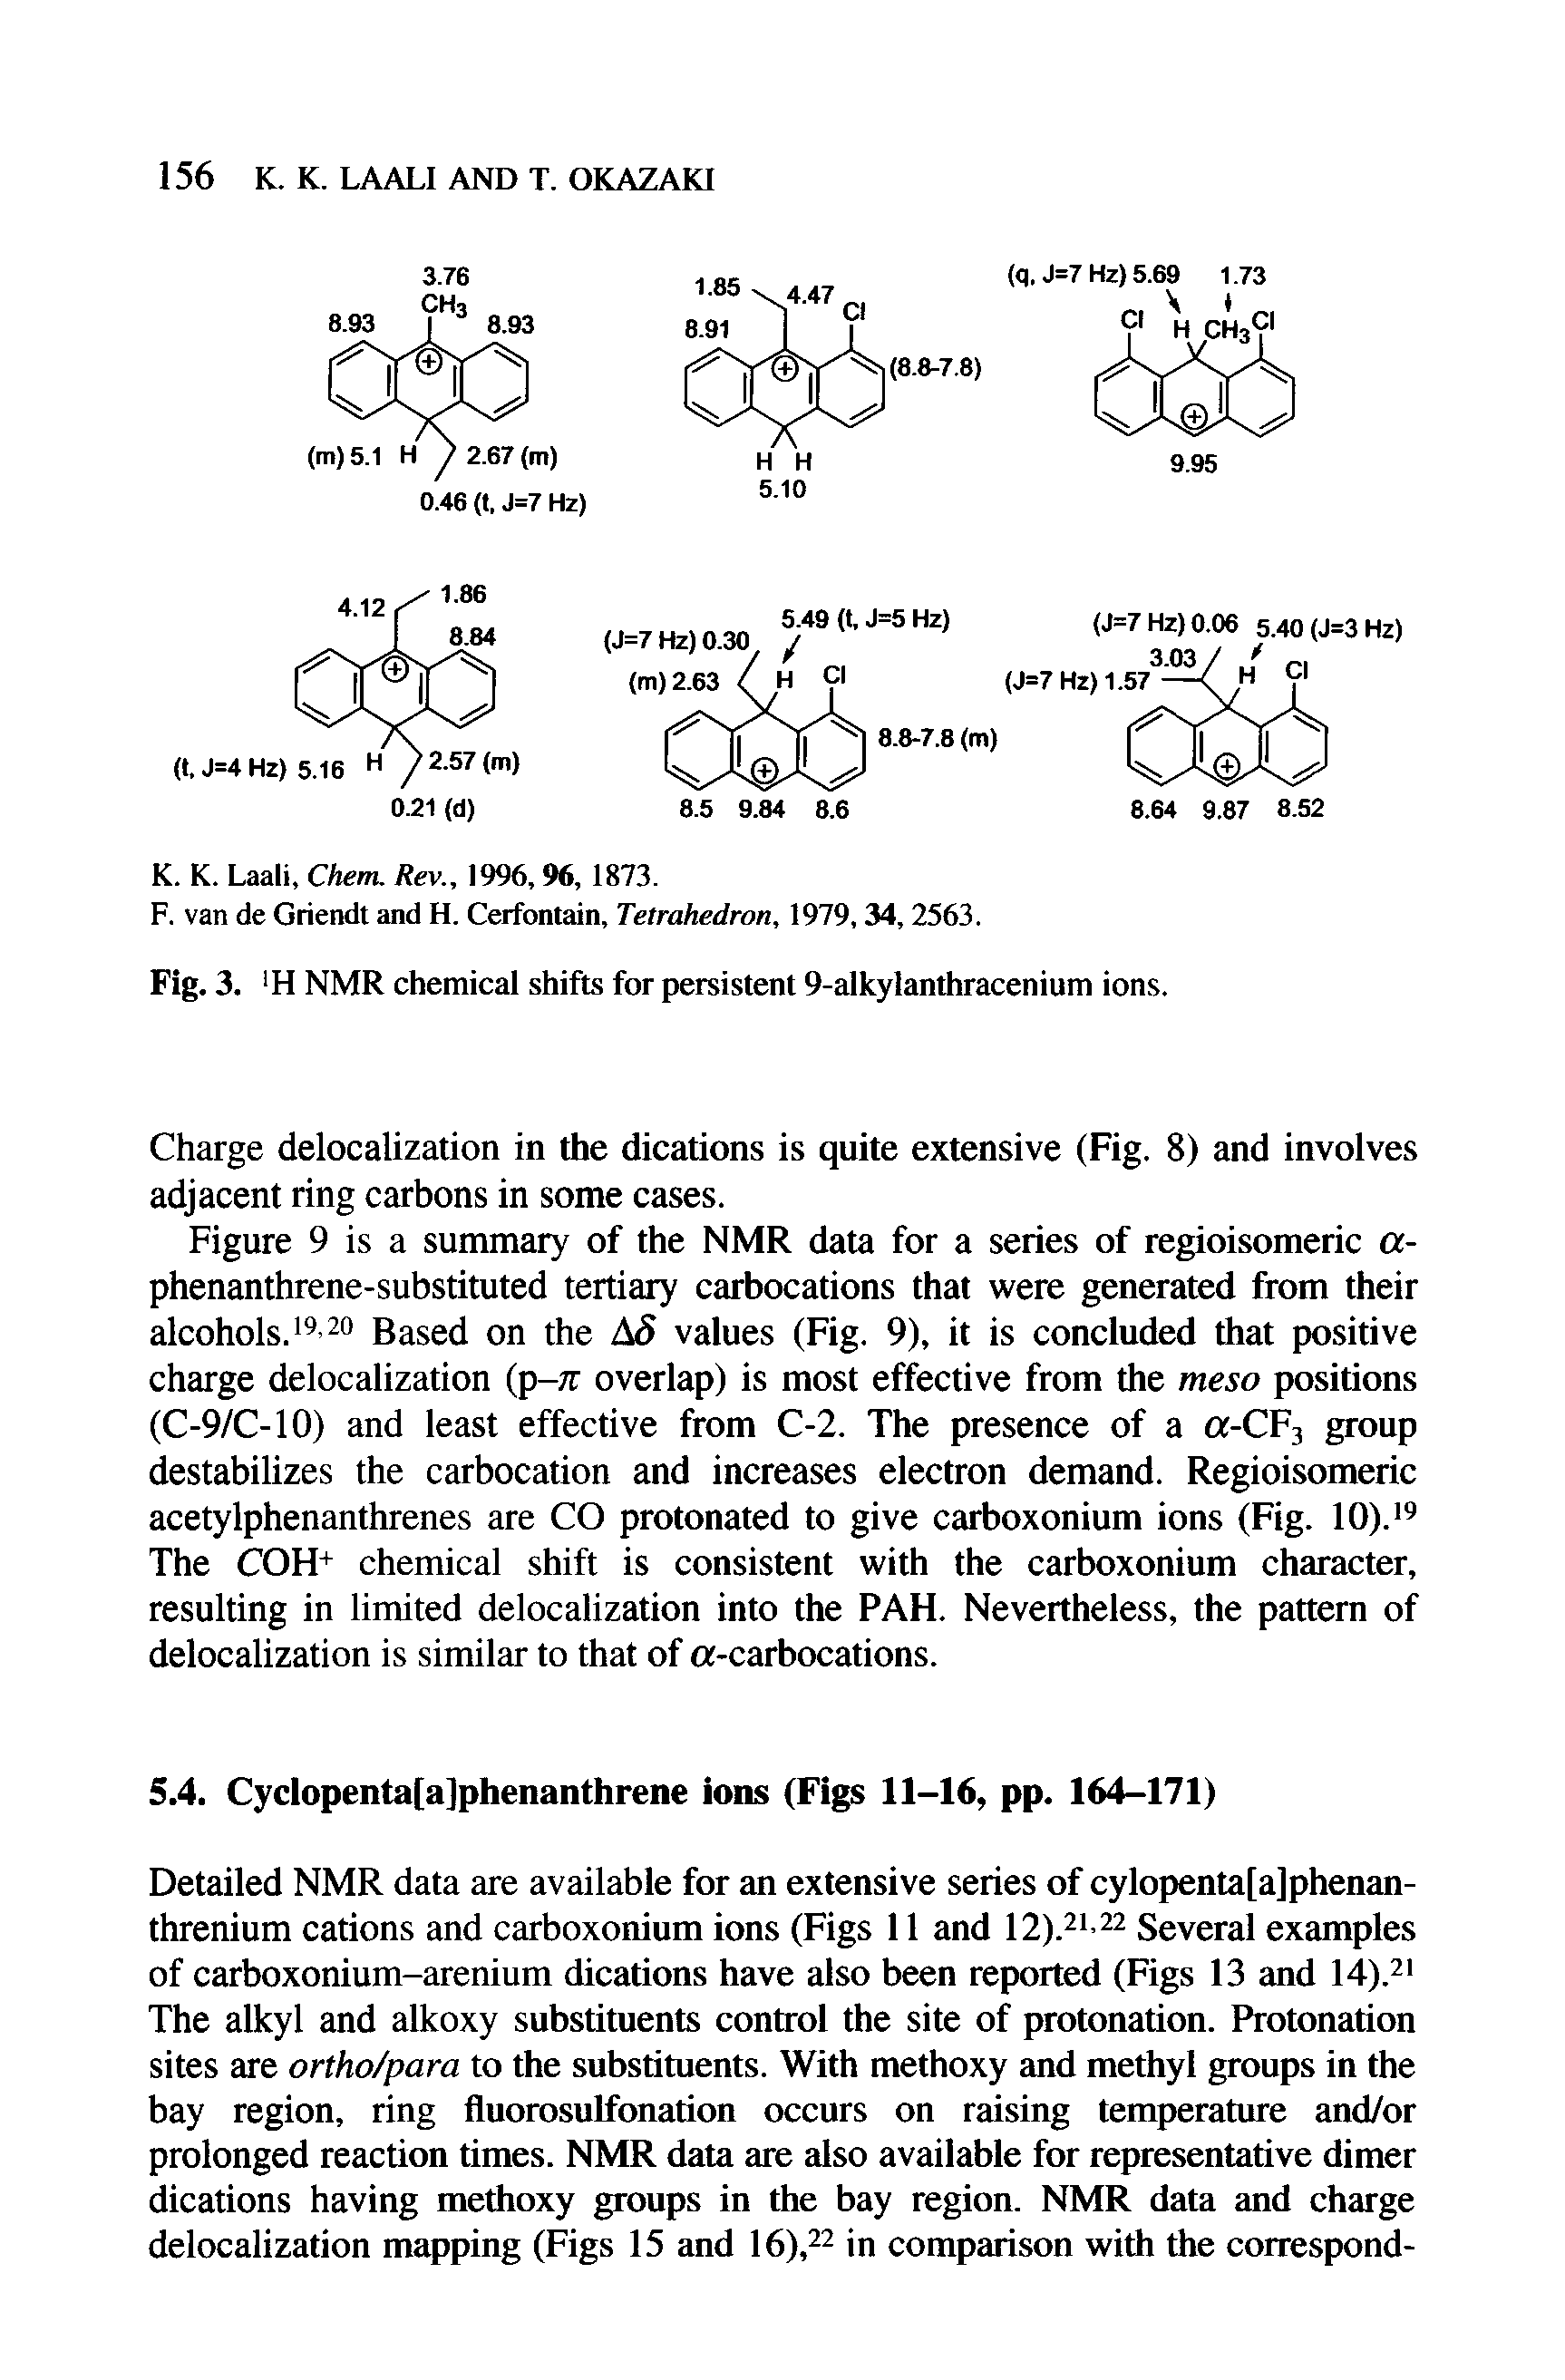 Figure 9 is a summary of the NMR data for a series of regioisomeric a-phenanthrene-substituted tertiary carbocations that were generated from their alcohols.19 20 Based on the AS values (Fig. 9), it is concluded that positive charge delocalization (p-7r overlap) is most effective from the meso positions (C-9/C-10) and least effective from C-2. The presence of a a-CF3 group destabilizes the carbocation and increases electron demand. Regioisomeric acetylphenanthrenes are CO protonated to give carboxonium ions (Fig. 10).19 The COH+ chemical shift is consistent with the carboxonium character, resulting in limited delocalization into the PAH. Nevertheless, the pattern of delocalization is similar to that of a-carbocations.